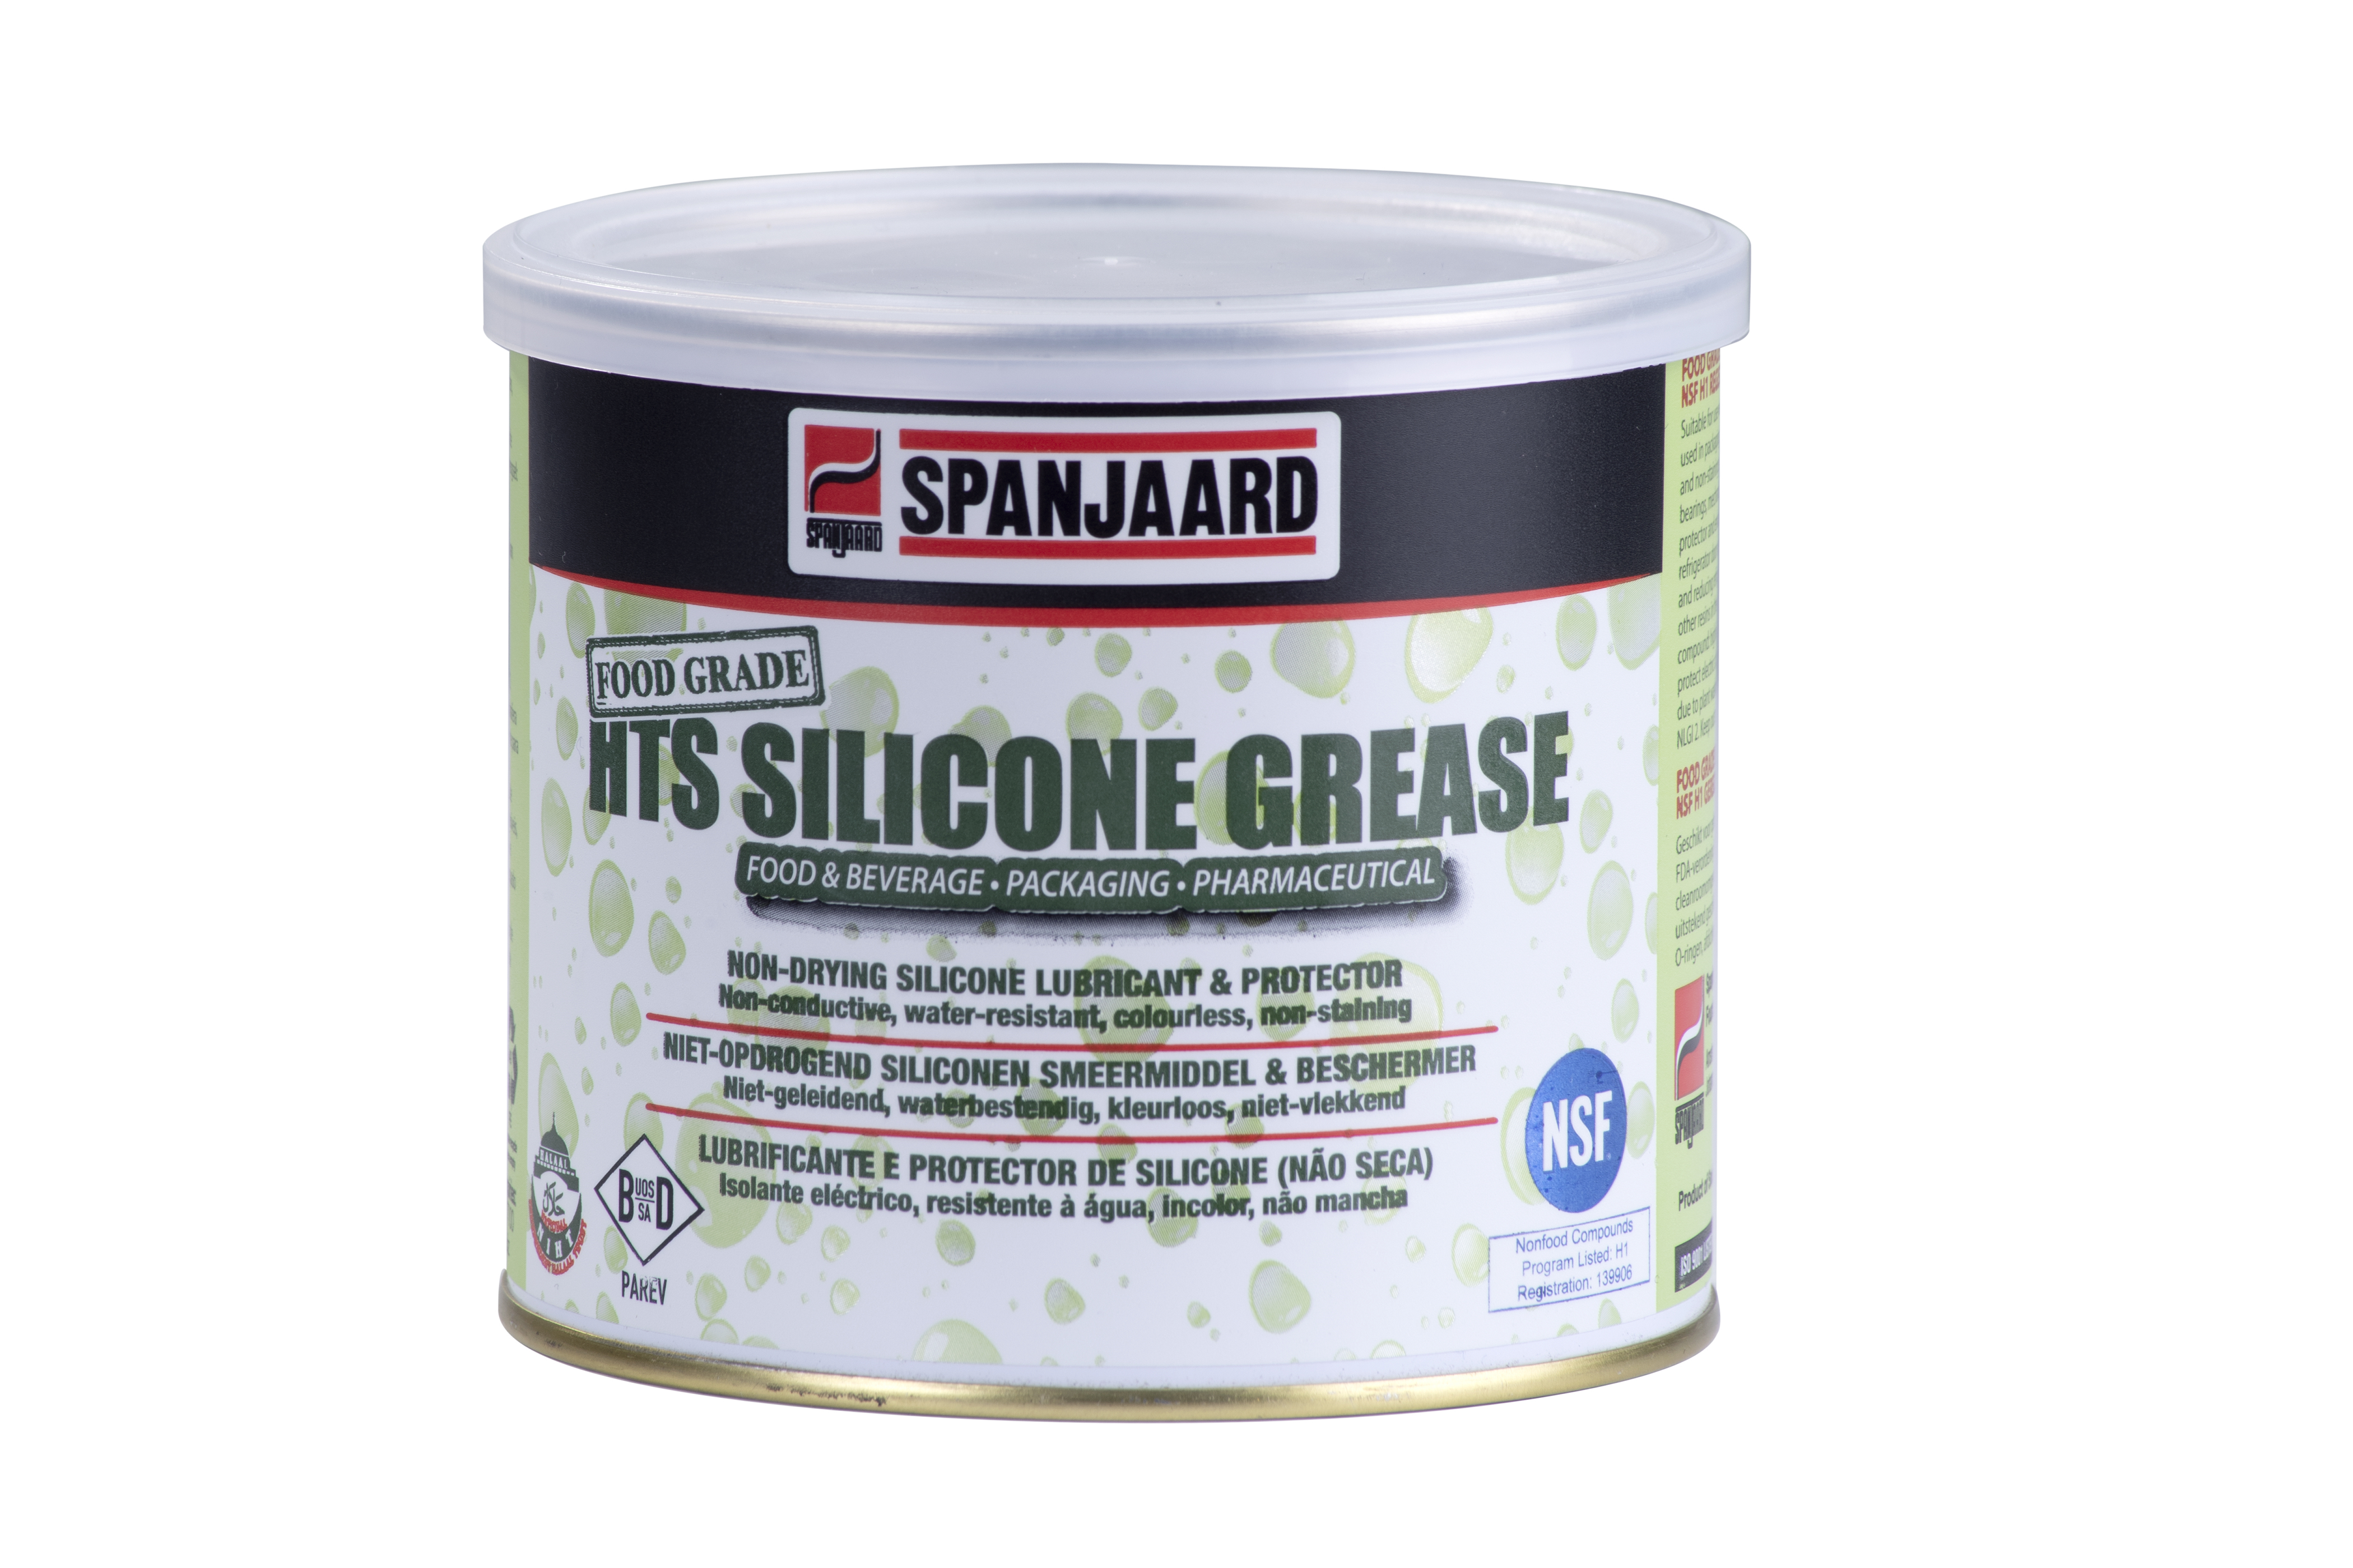 HTS SILICONE GREASE (FOOD GRADE)